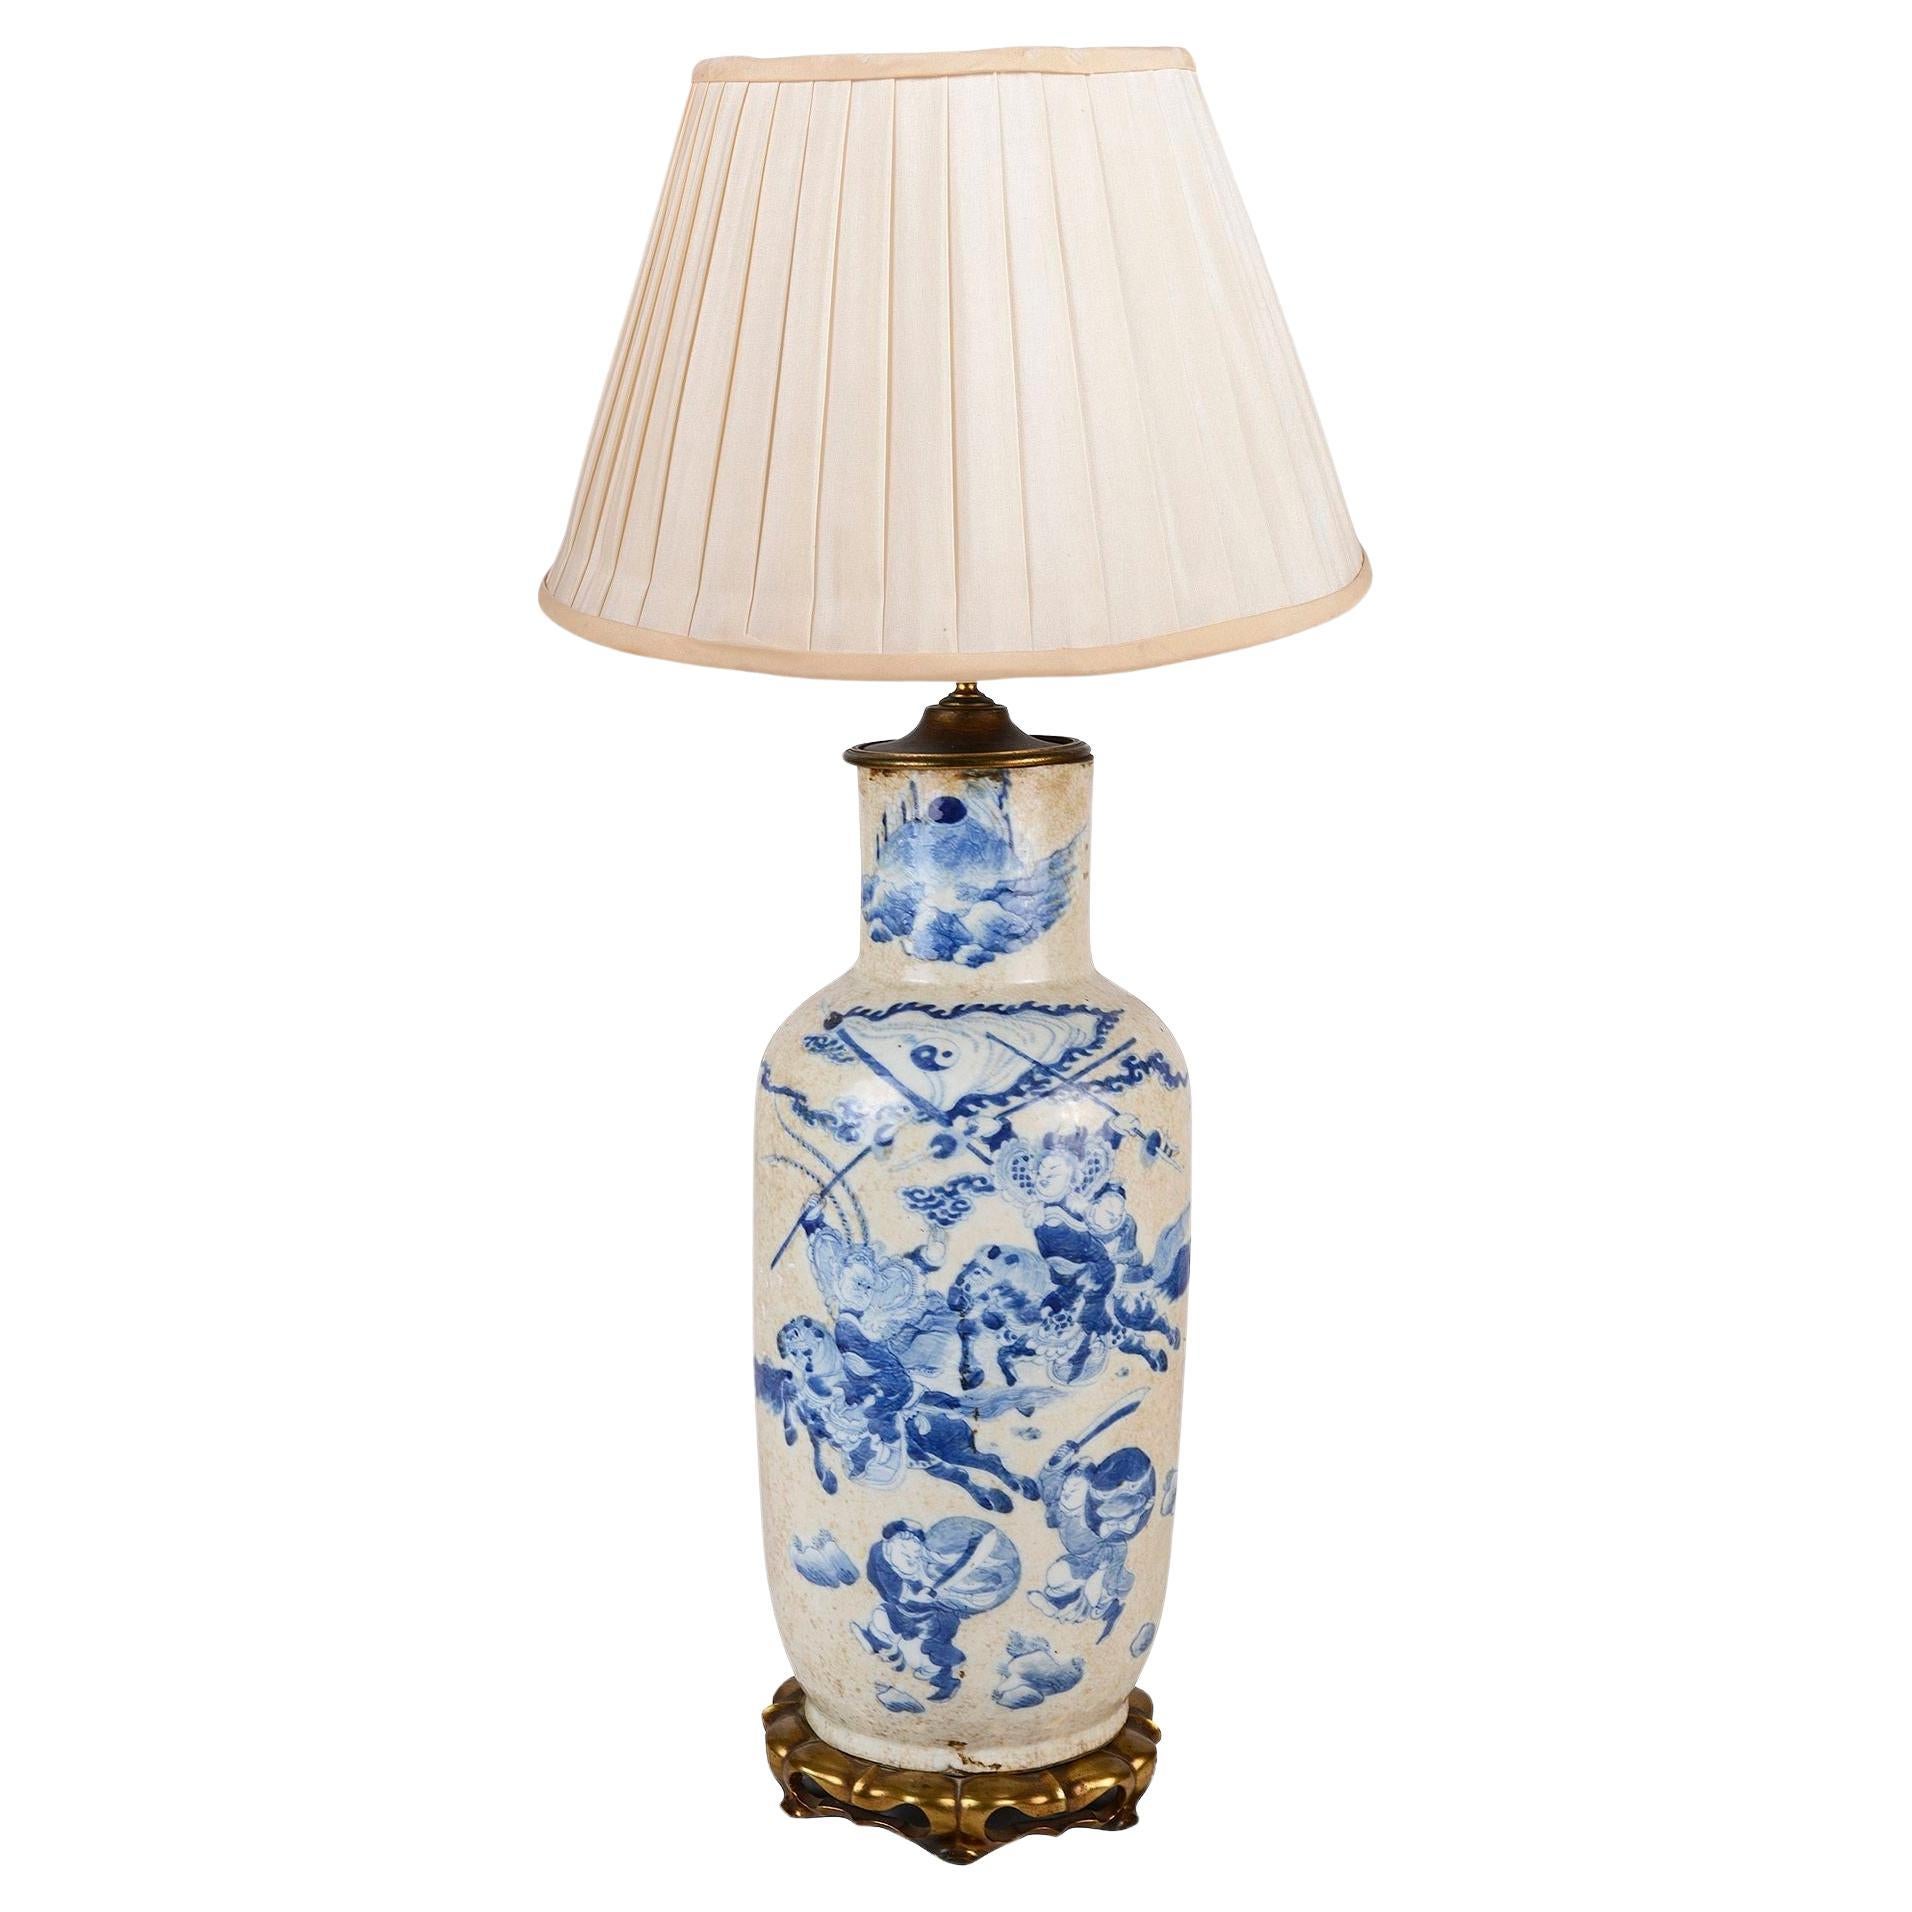 19th Century, Chinese Blue and White vase / lamp. 56cm (22") high